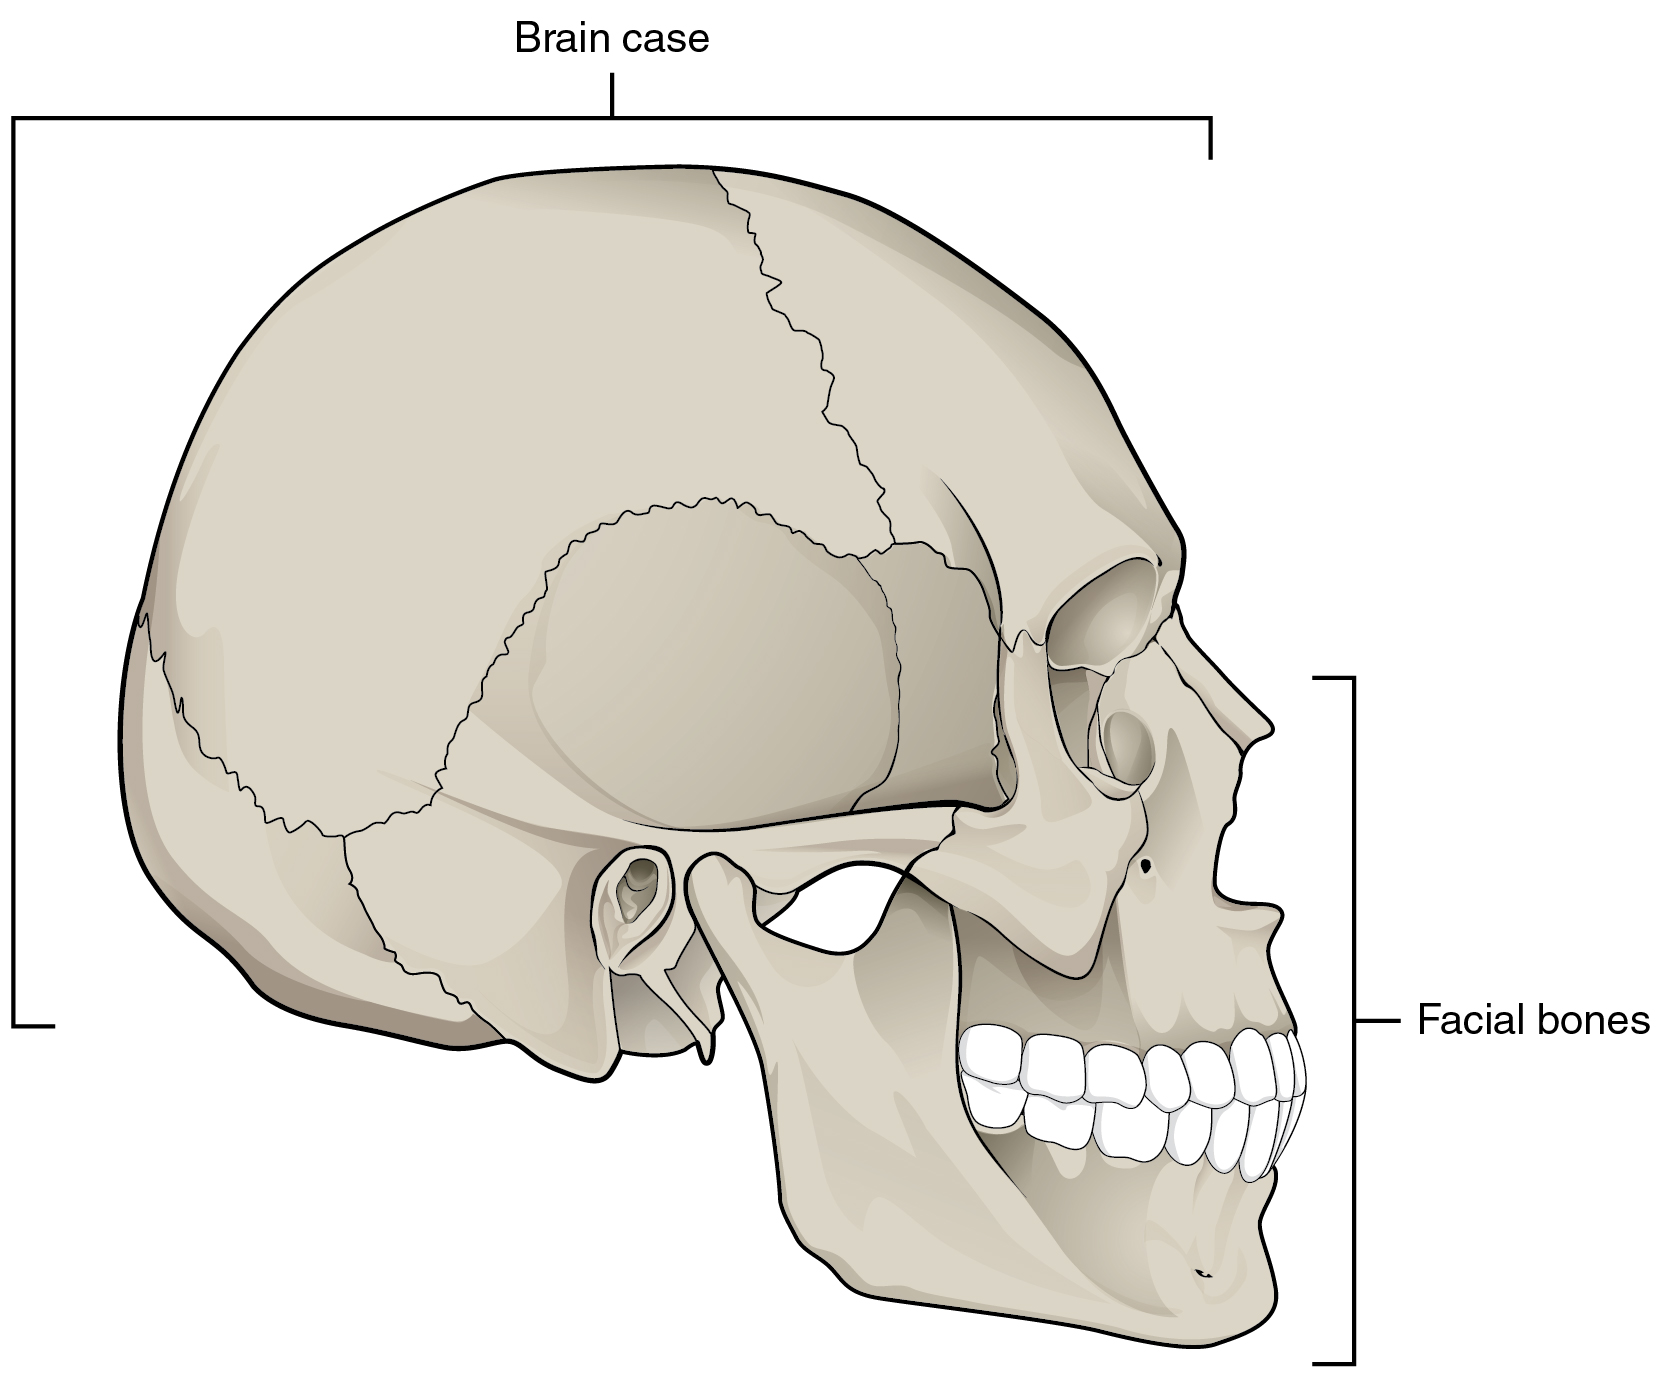 only movable bone in the skull